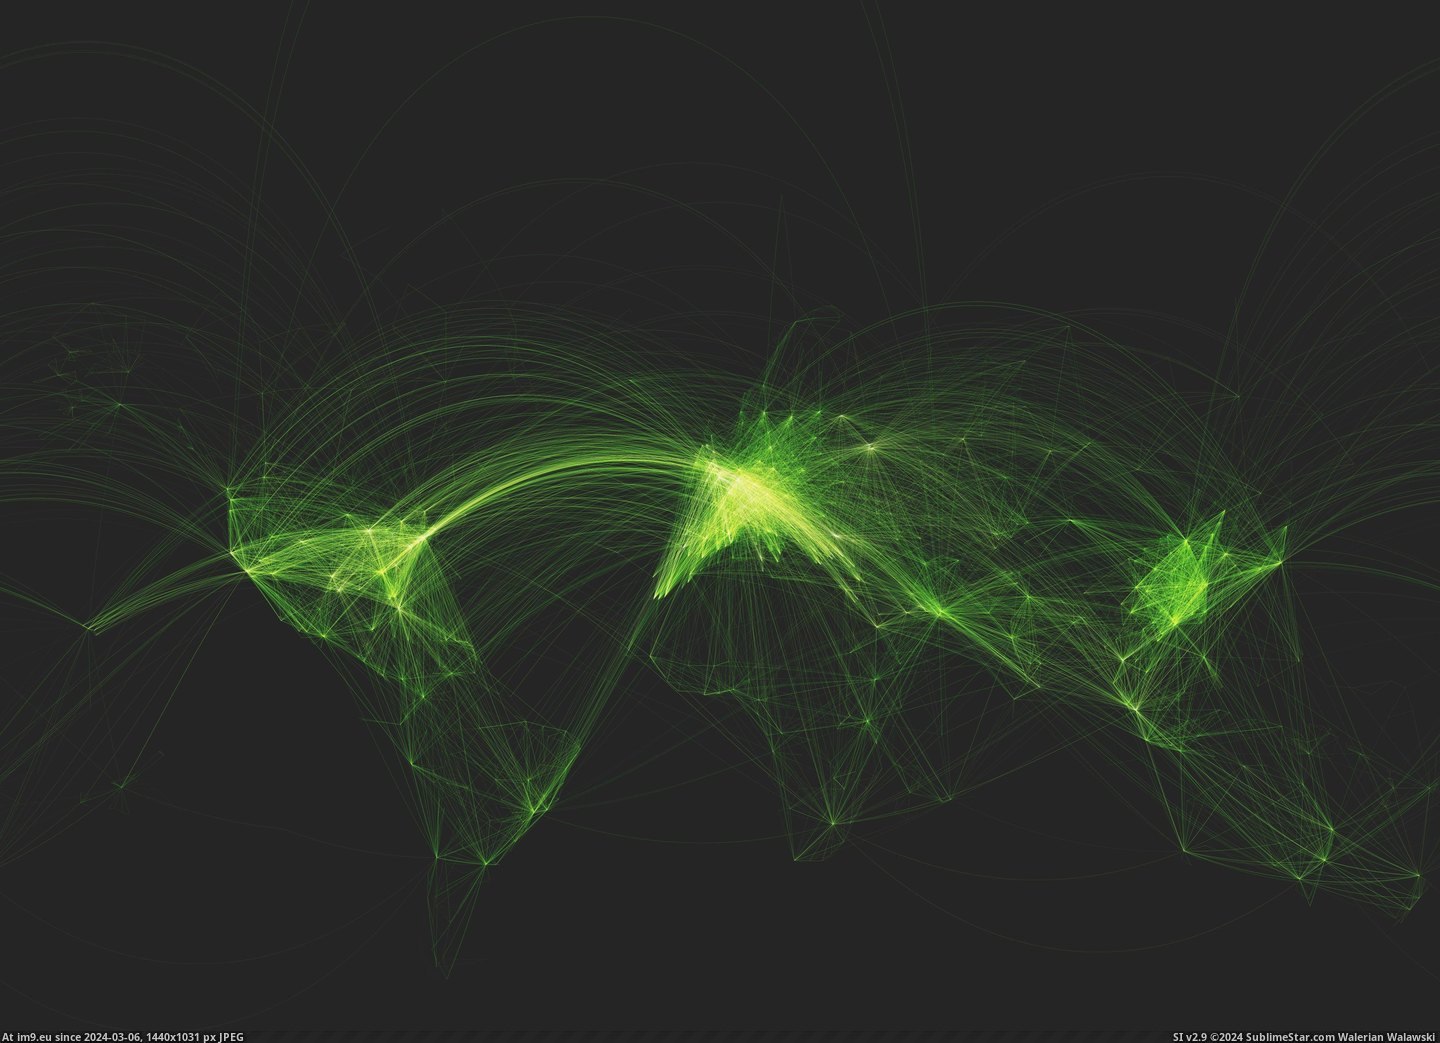 #Wallpaper #Beautiful #World #Web #Traffic #Routes #Map #Wide #Air [Mapporn] World-Wide Air Traffic Routes[4000x2875](Web-Map in comments) Pic. (Obraz z album My r/MAPS favs))